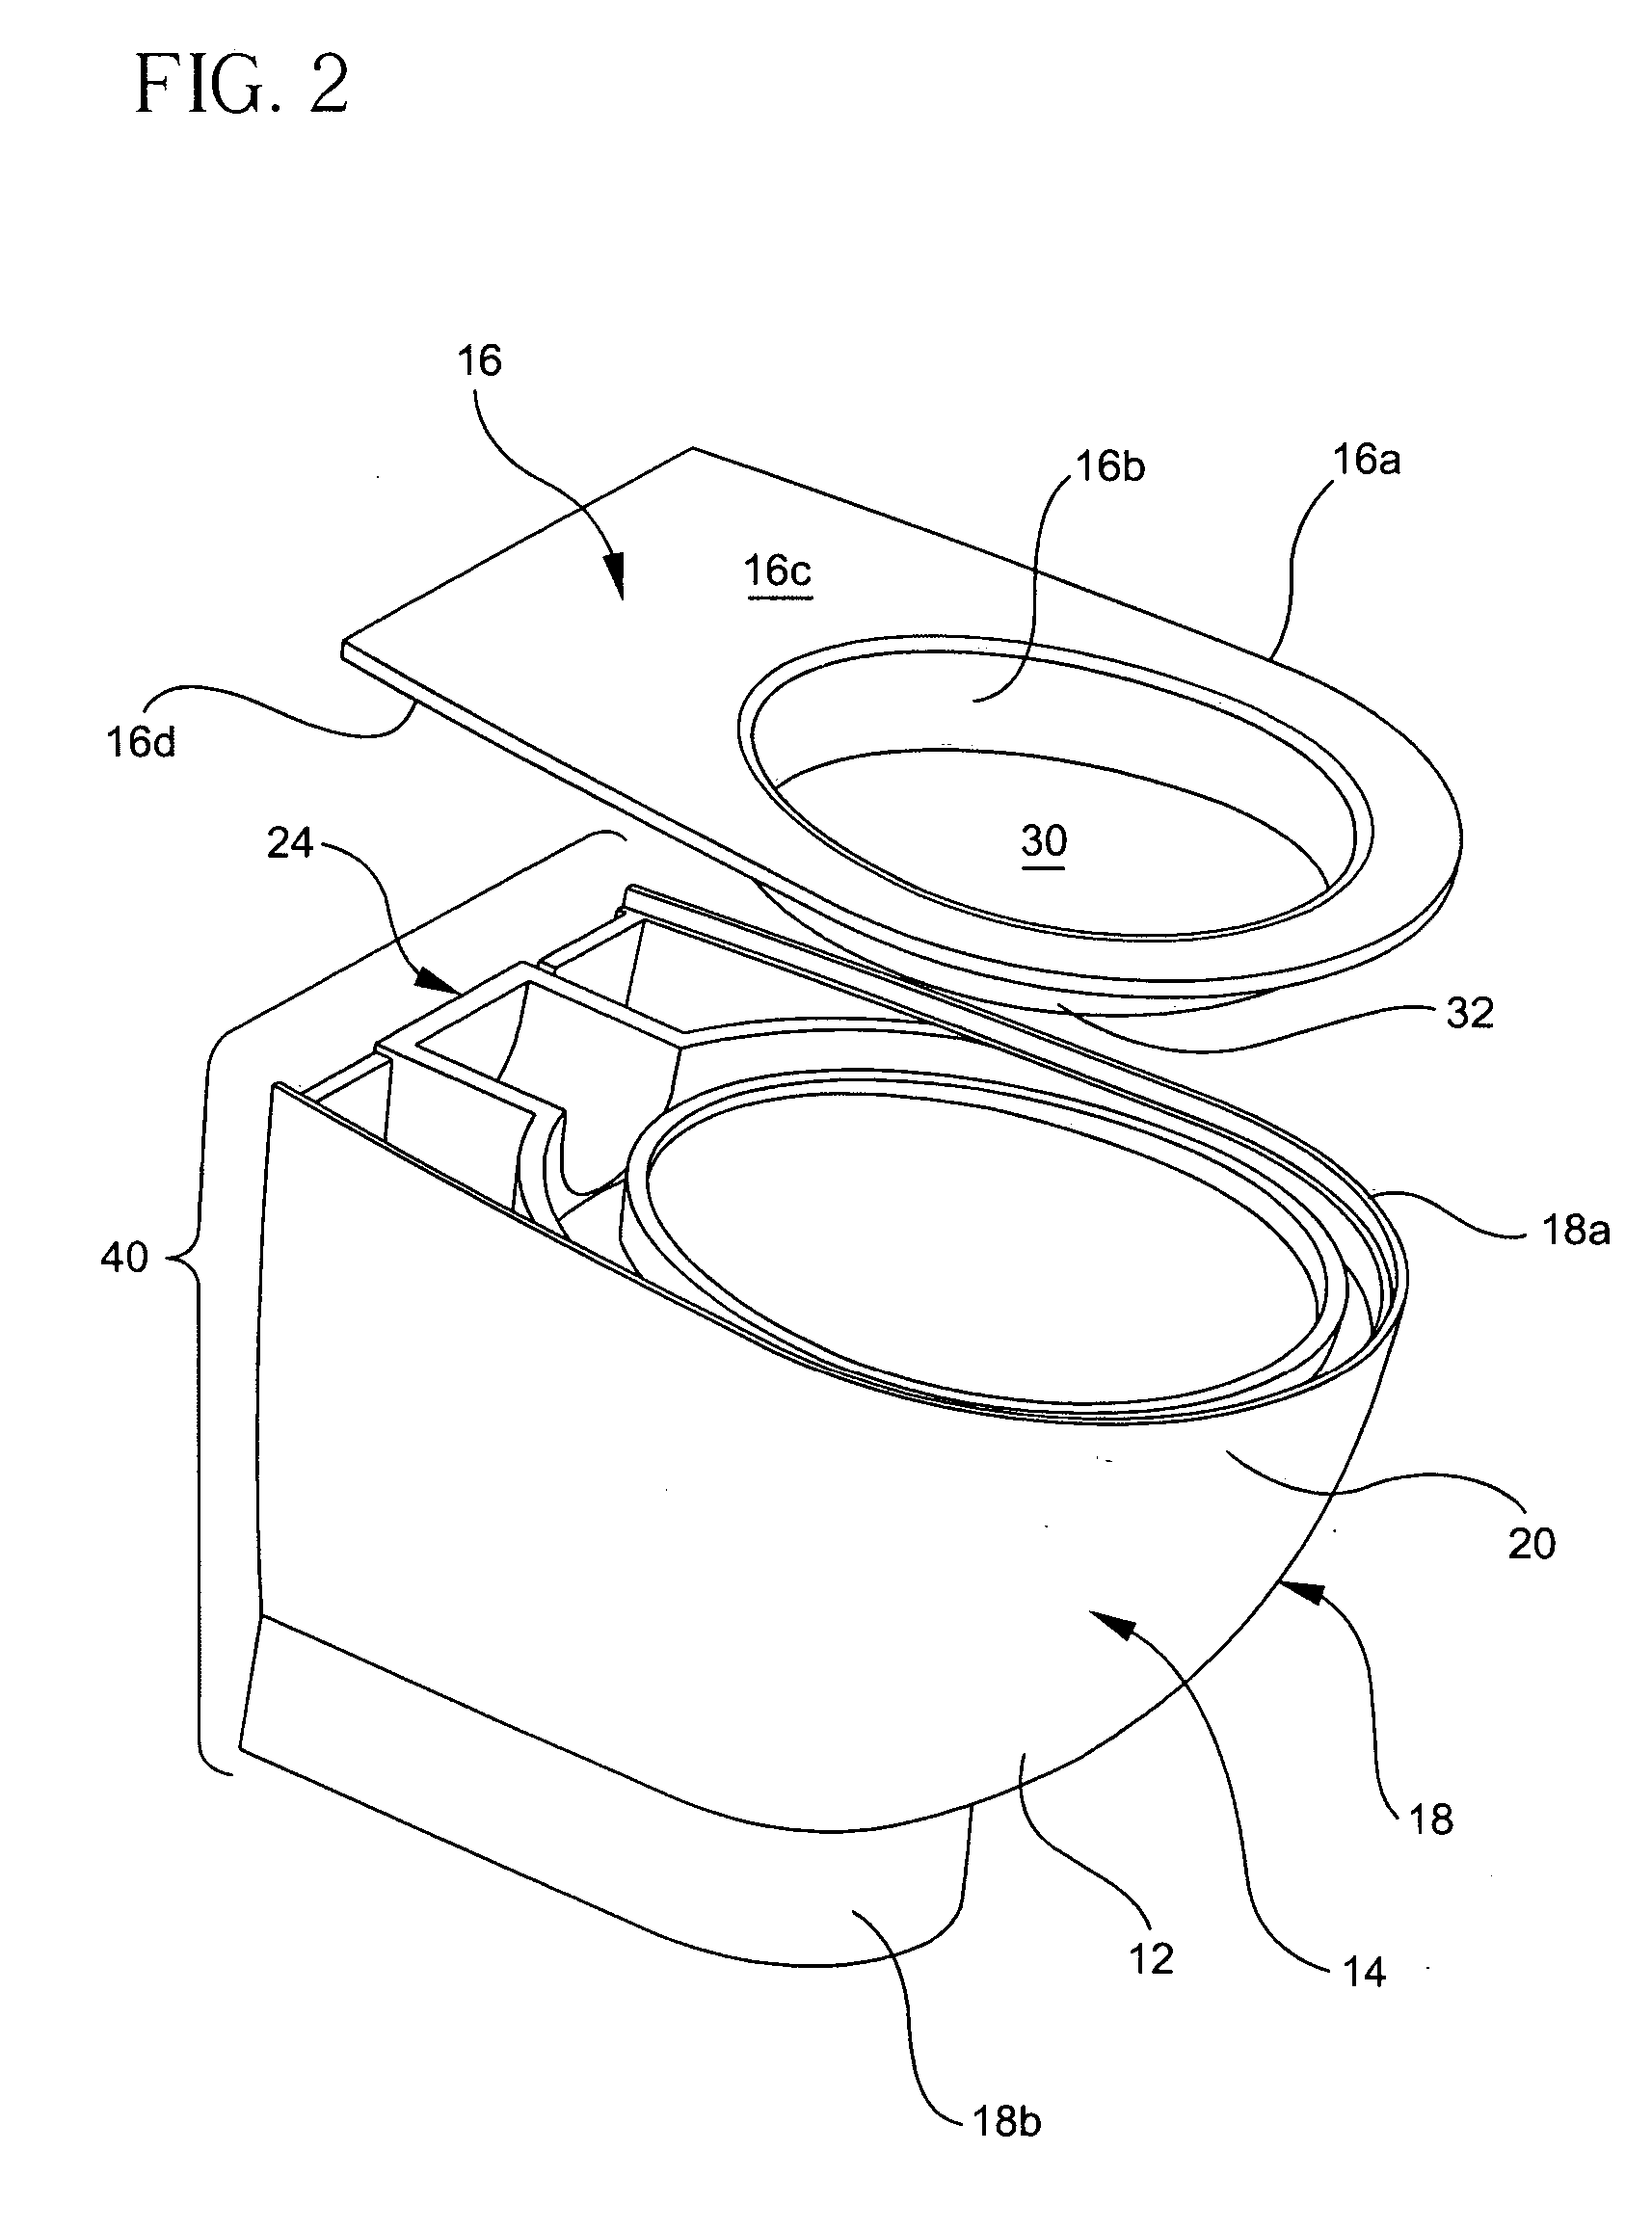 System and method for casting toilet bowls